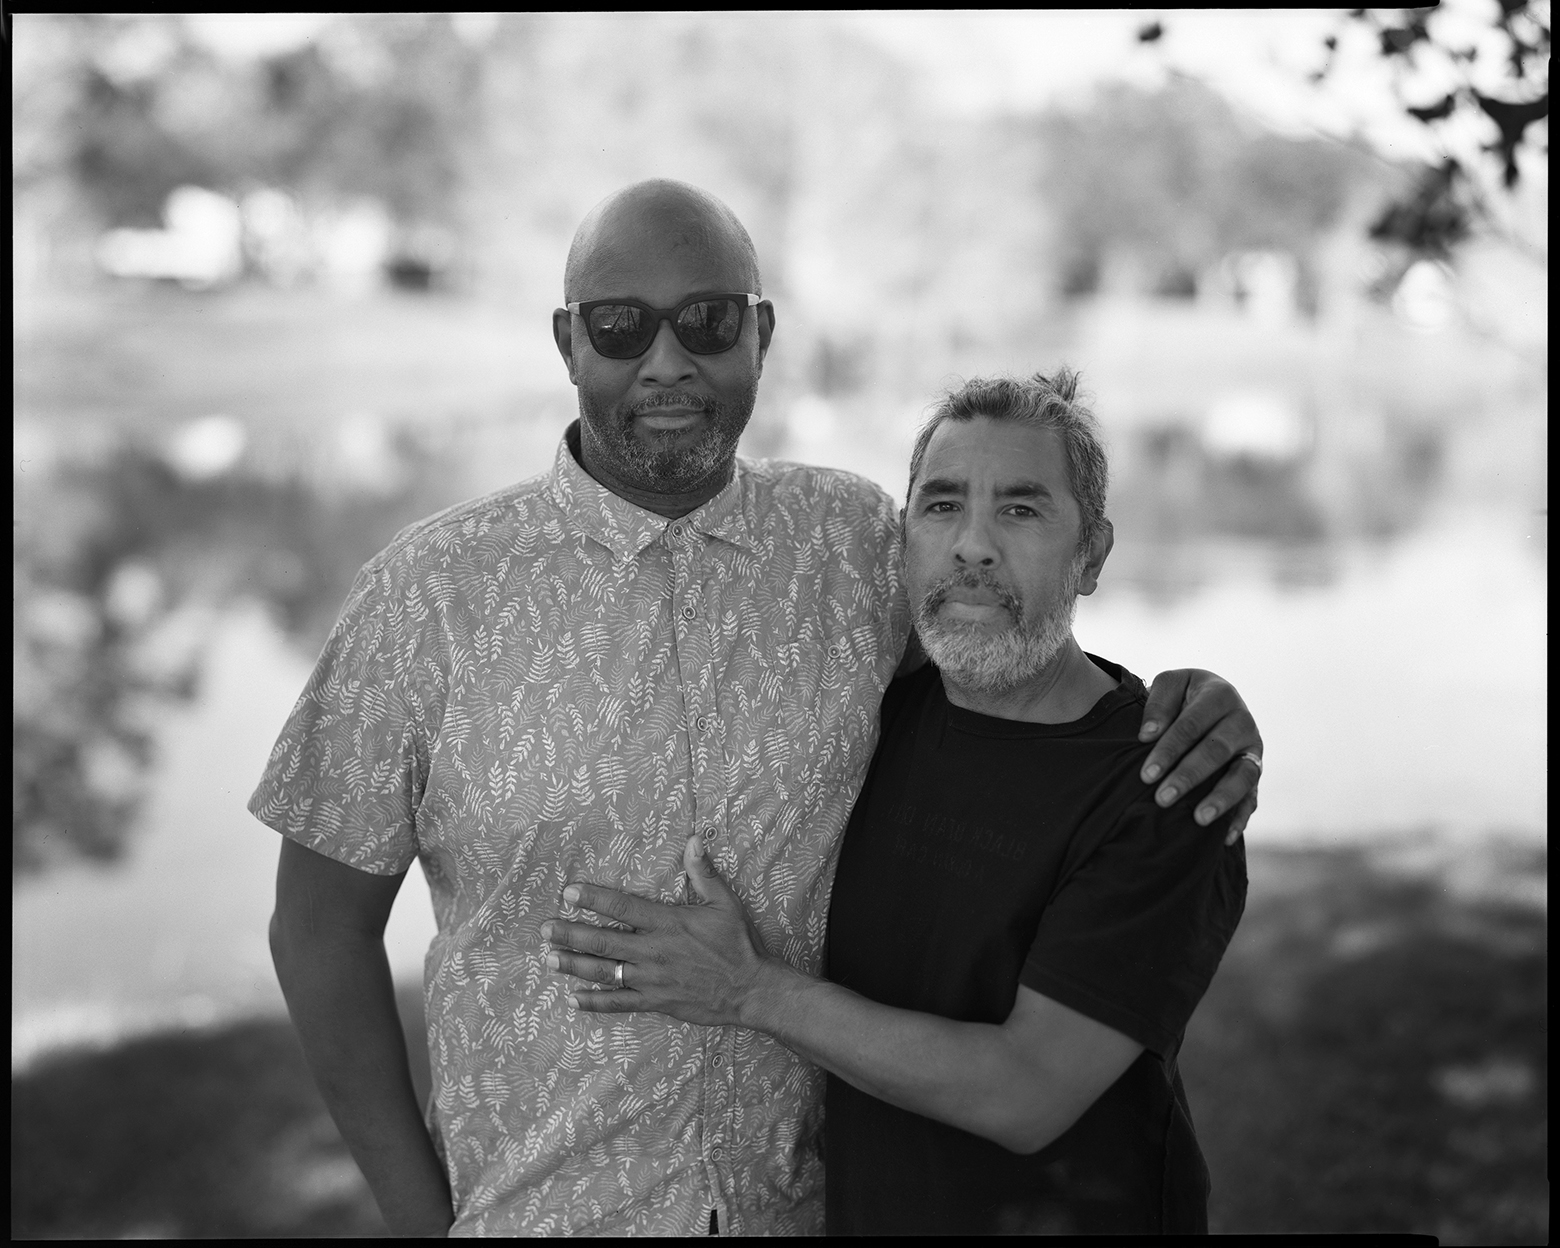 Ricardo and José stand close together outside in Winter Park, Florida, with their arms around one another as they look into the camera.